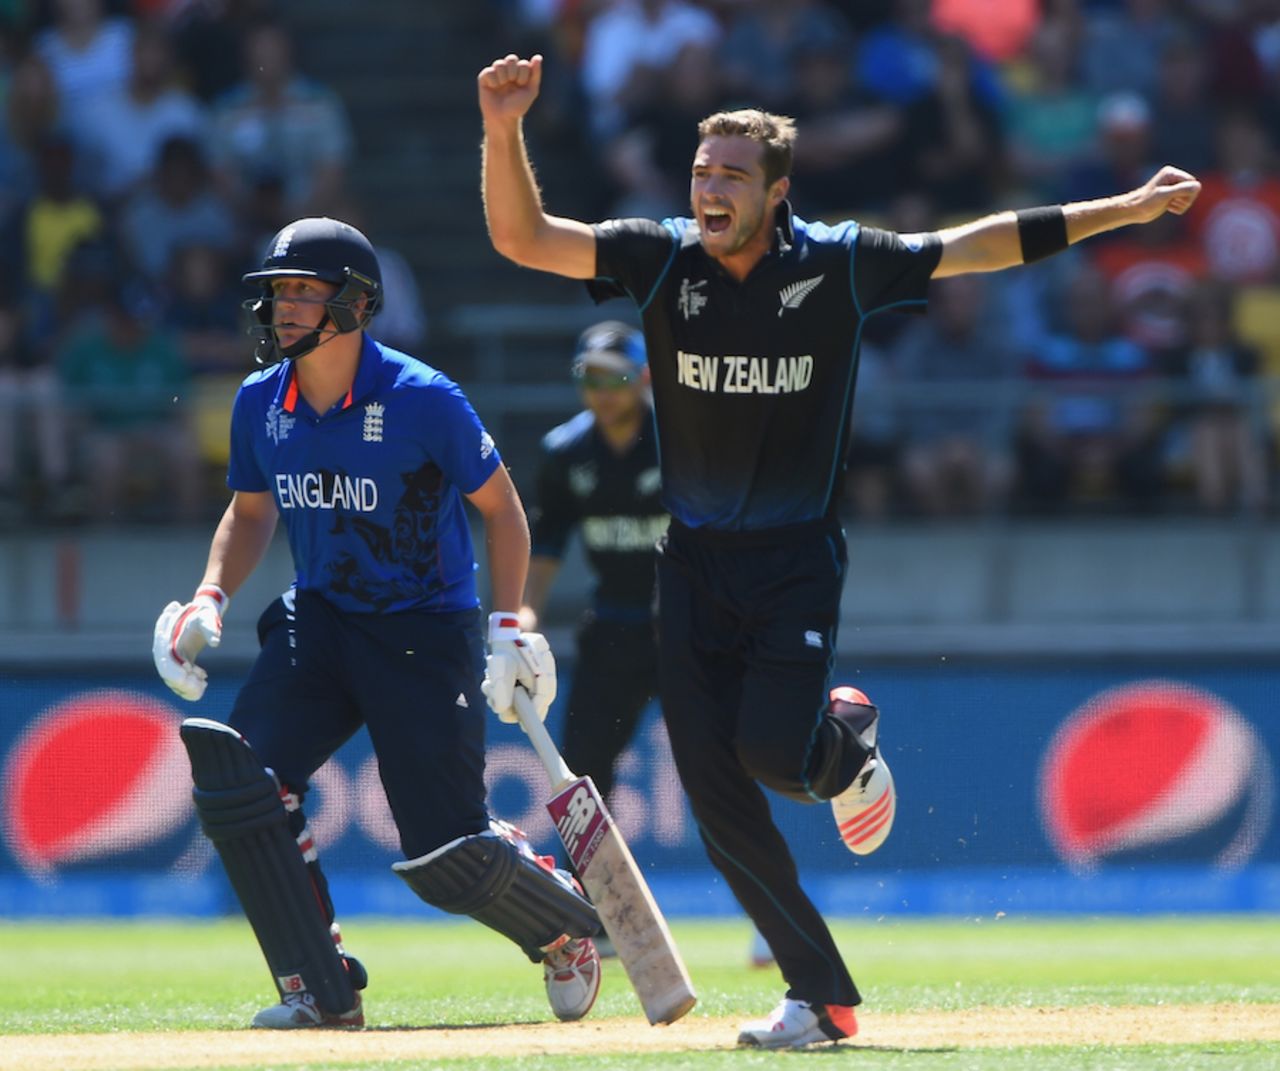 Tim Southee removed both the England openers, New Zealand v England, World Cup 2015, Group A, Wellington, February 20, 2015